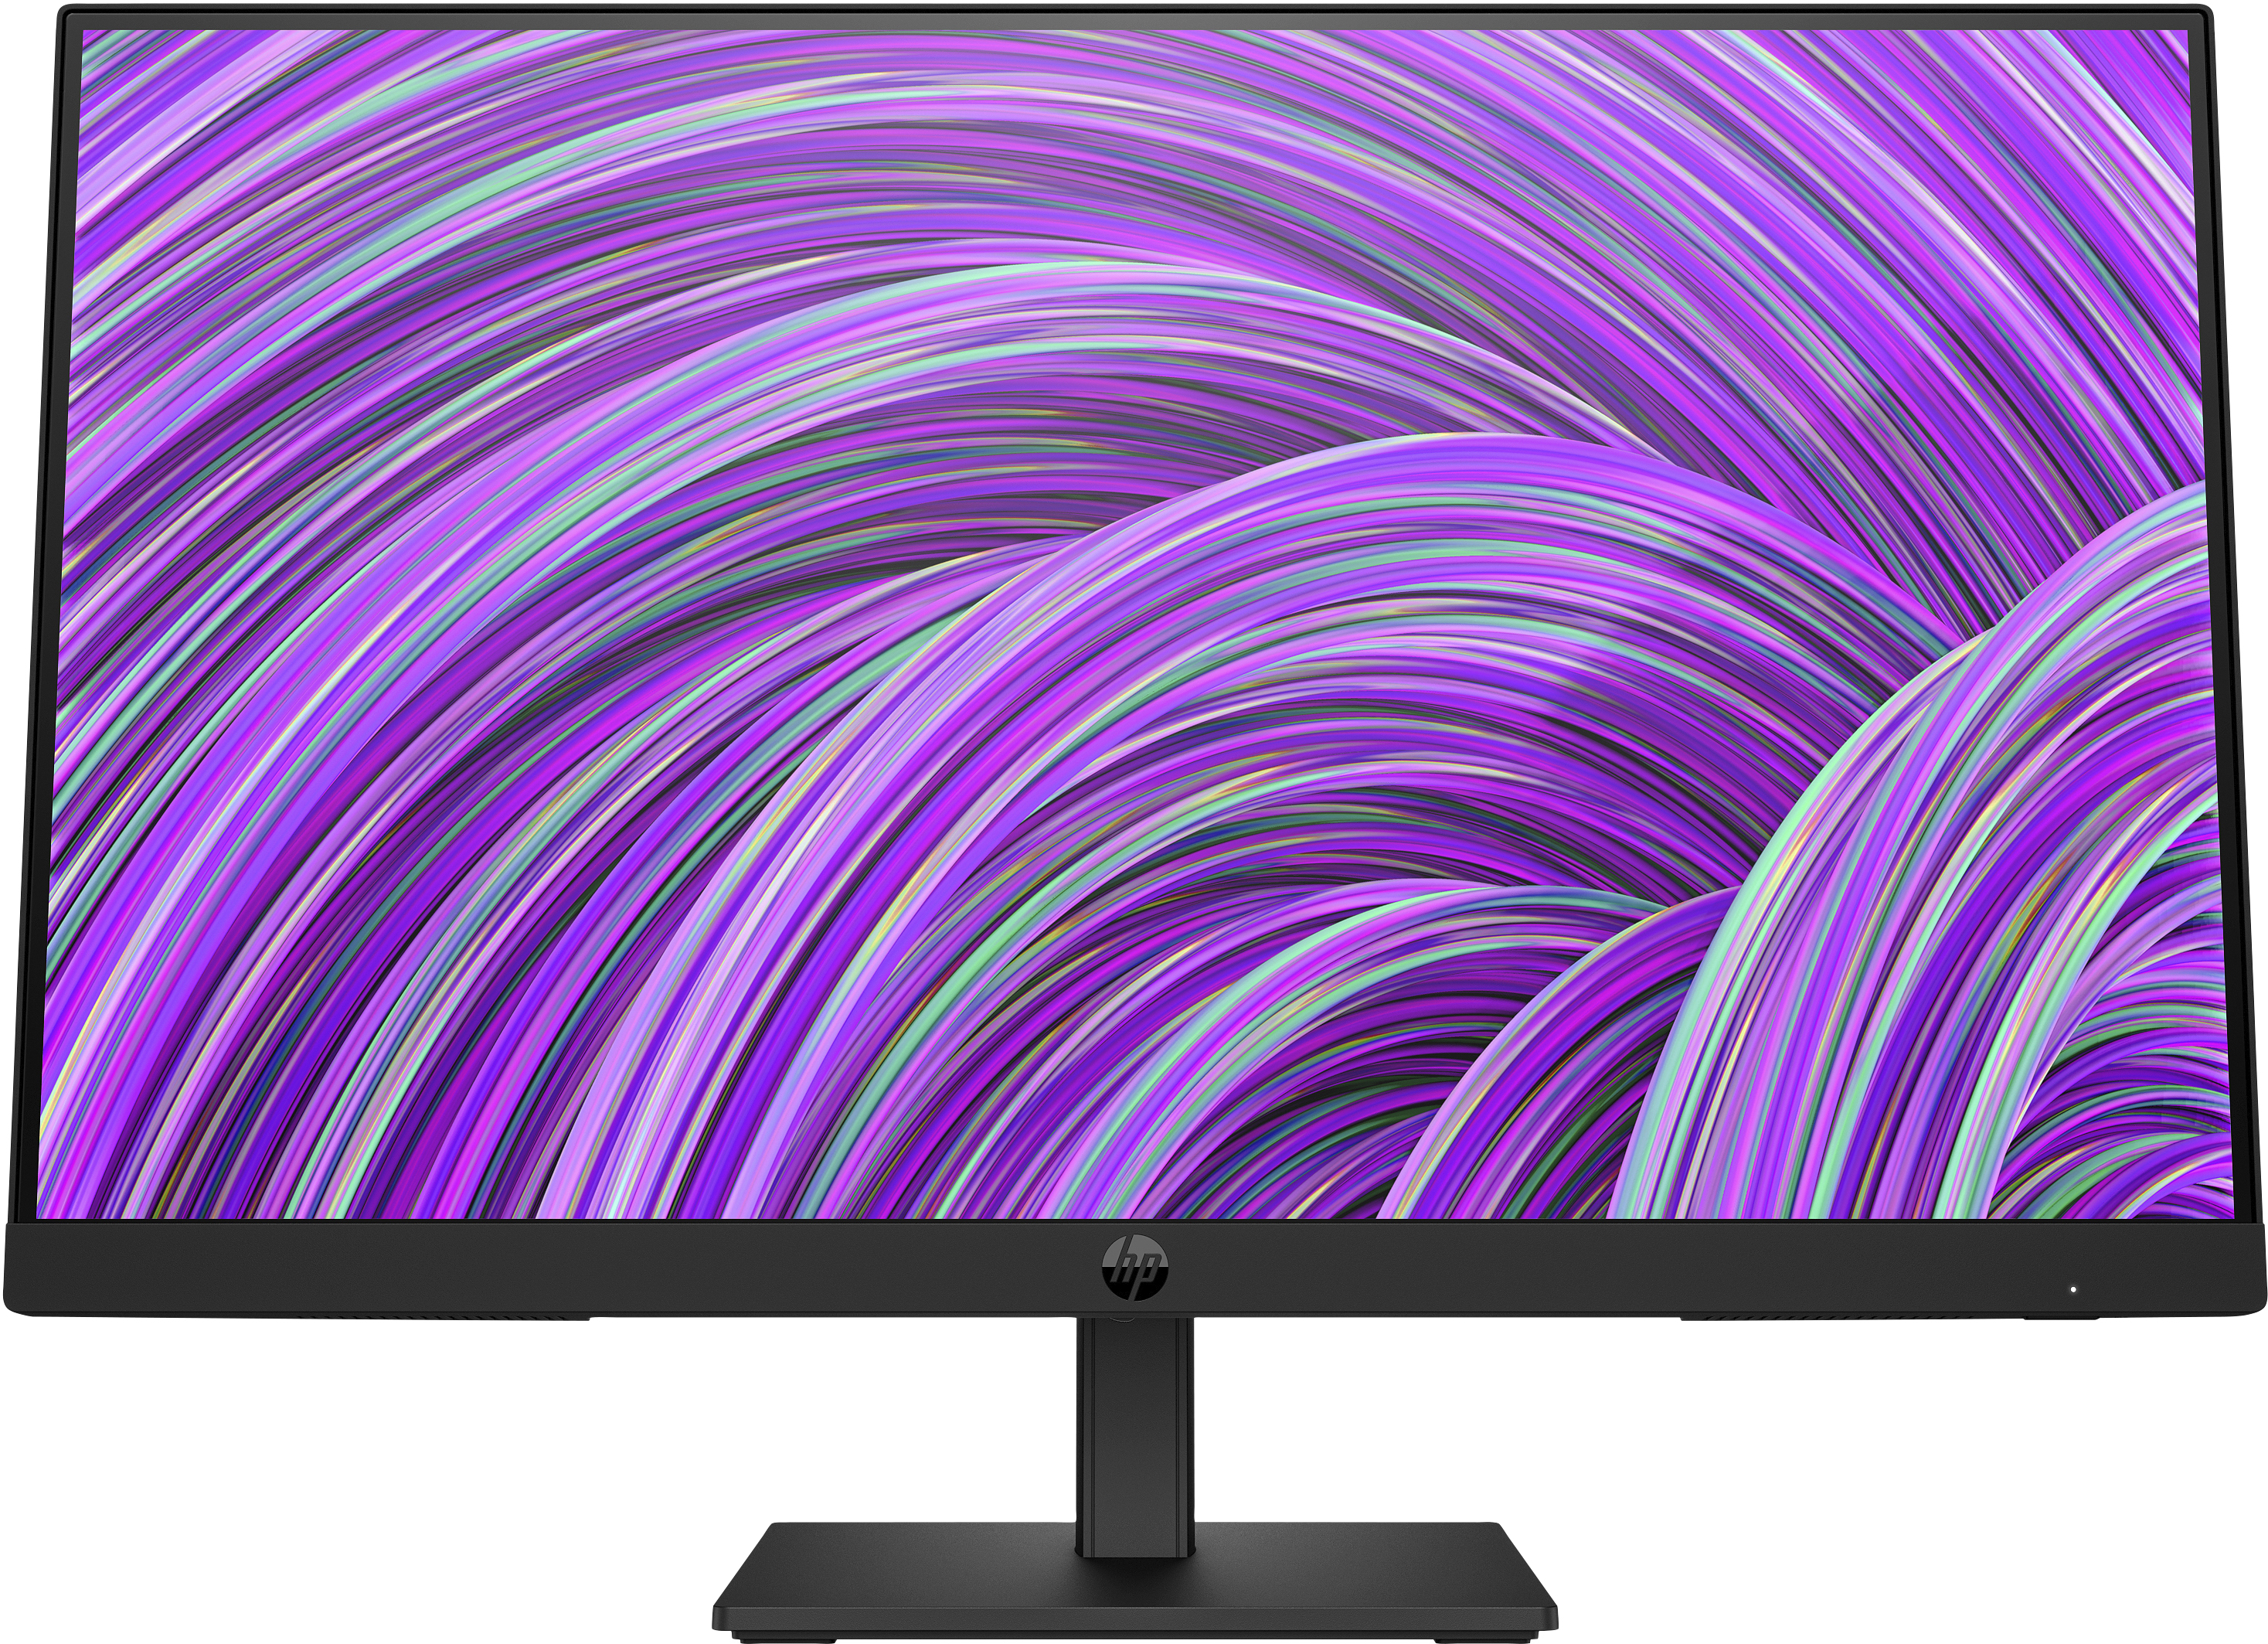 Image of HP P22h G5 FHD Monitor